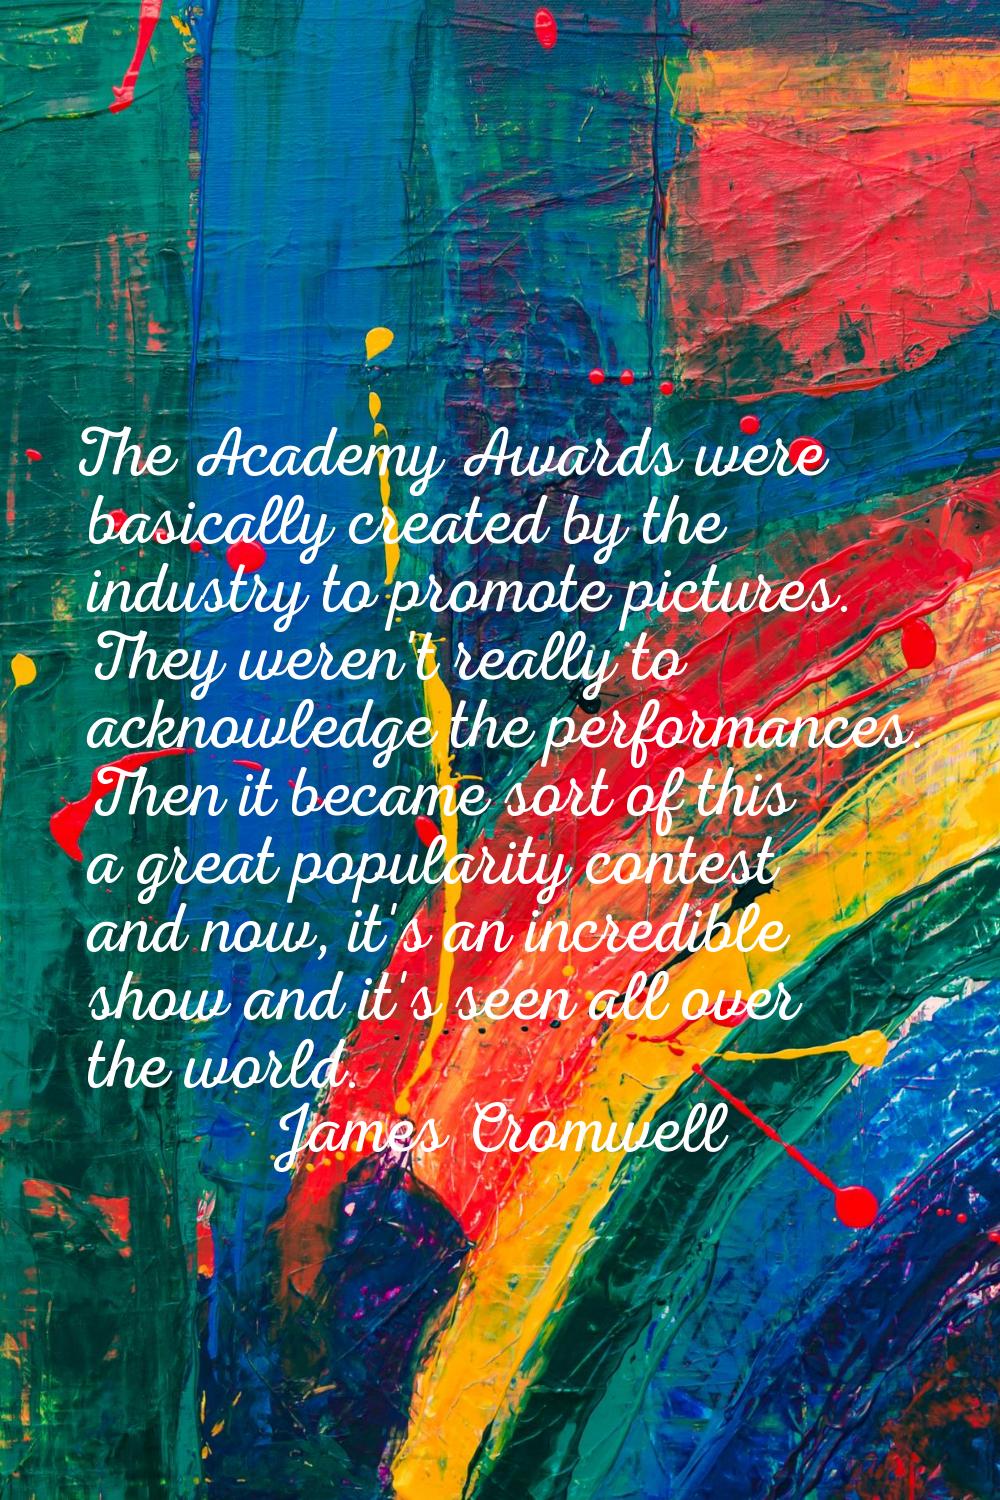 The Academy Awards were basically created by the industry to promote pictures. They weren't really 